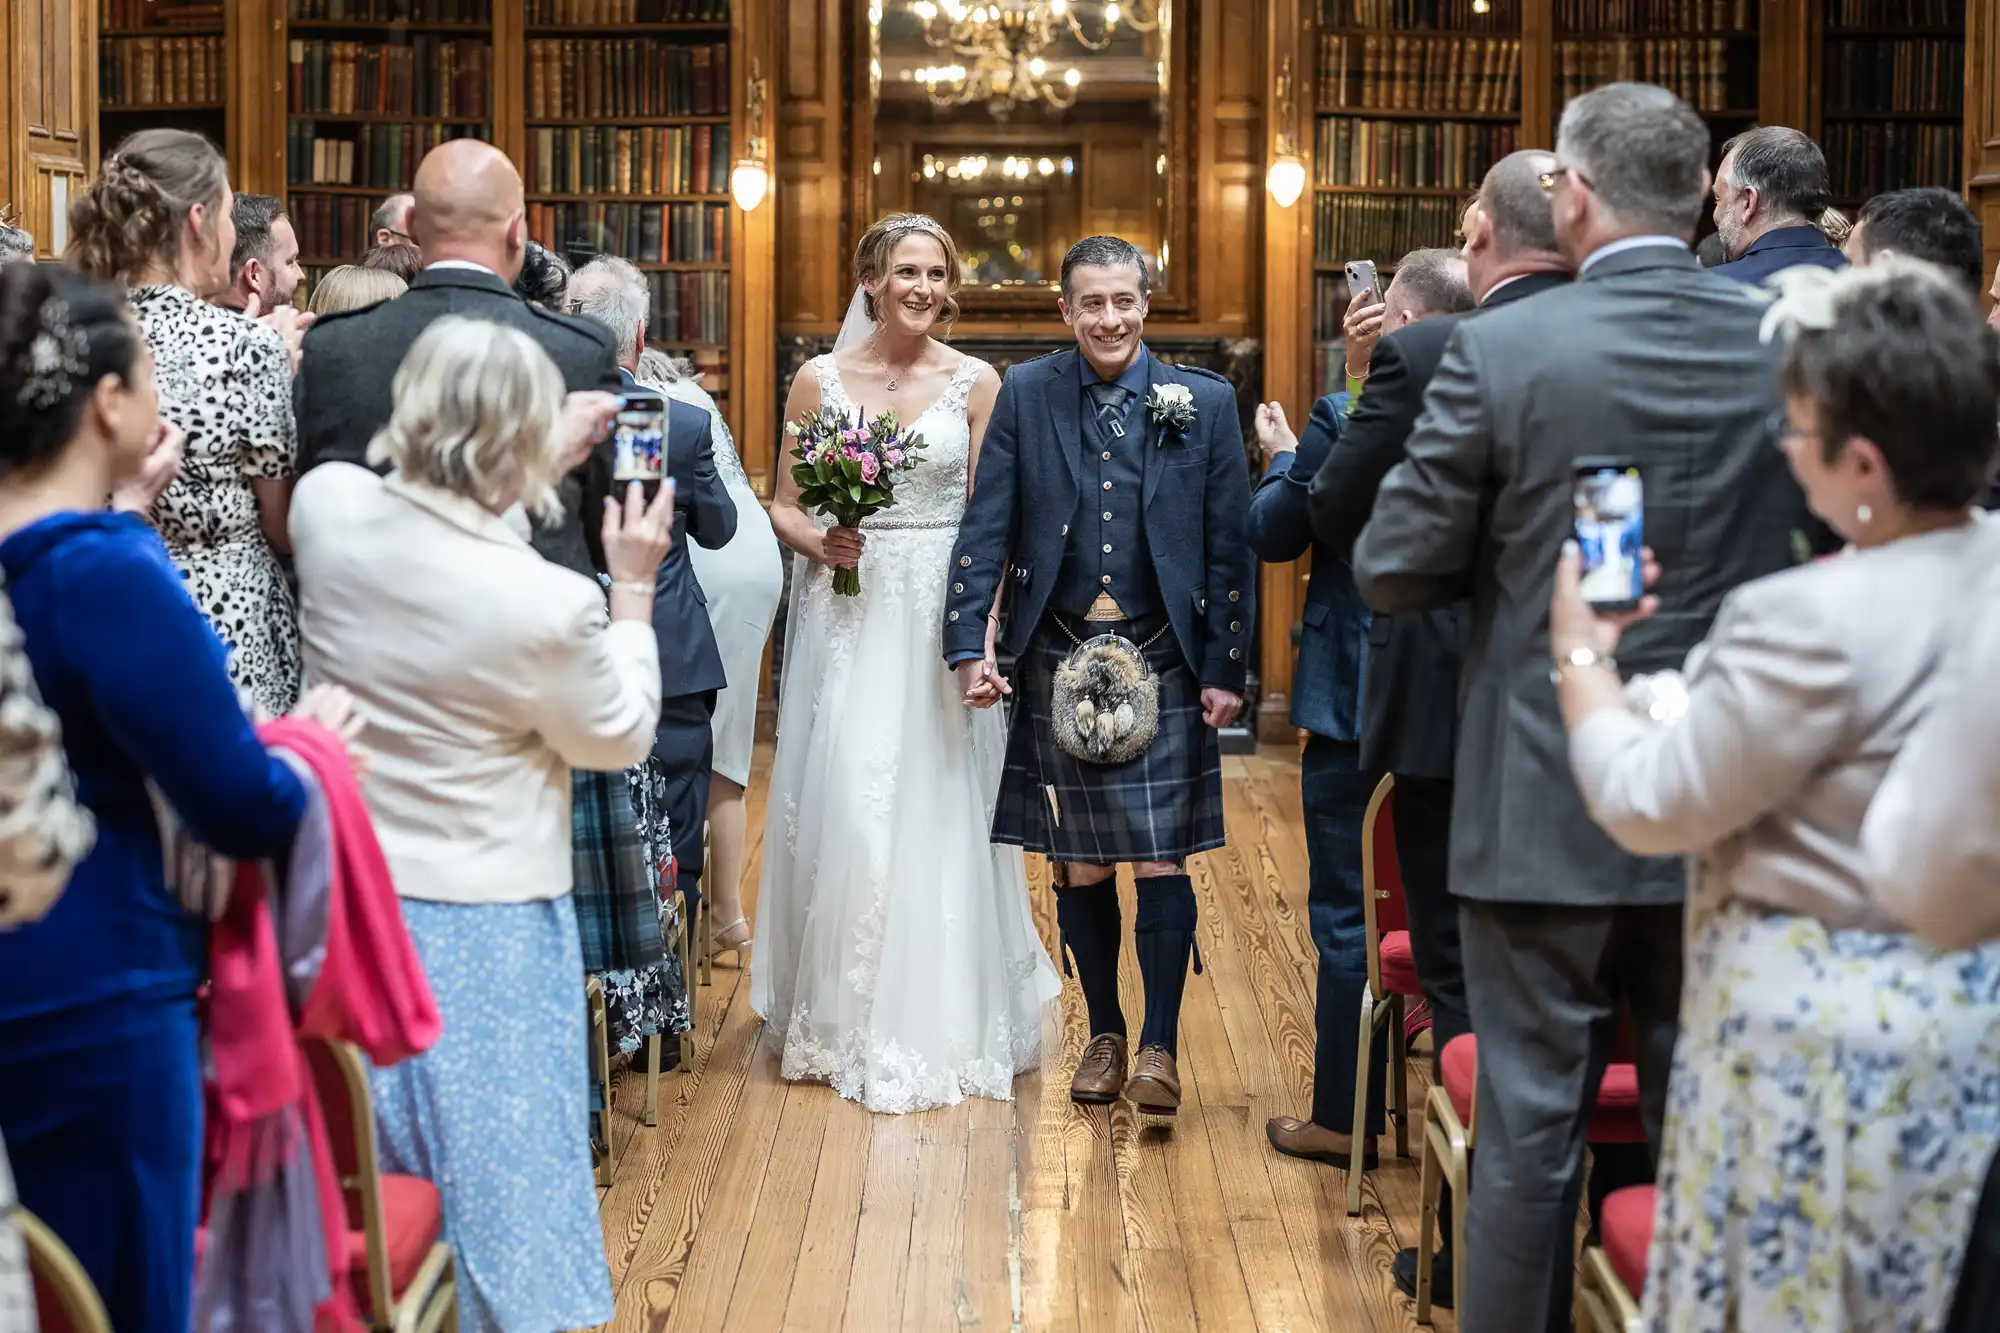 A newly-married couple, with the groom in a kilt and the bride in a white dress, walk down the aisle as guests take photos in a library setting.